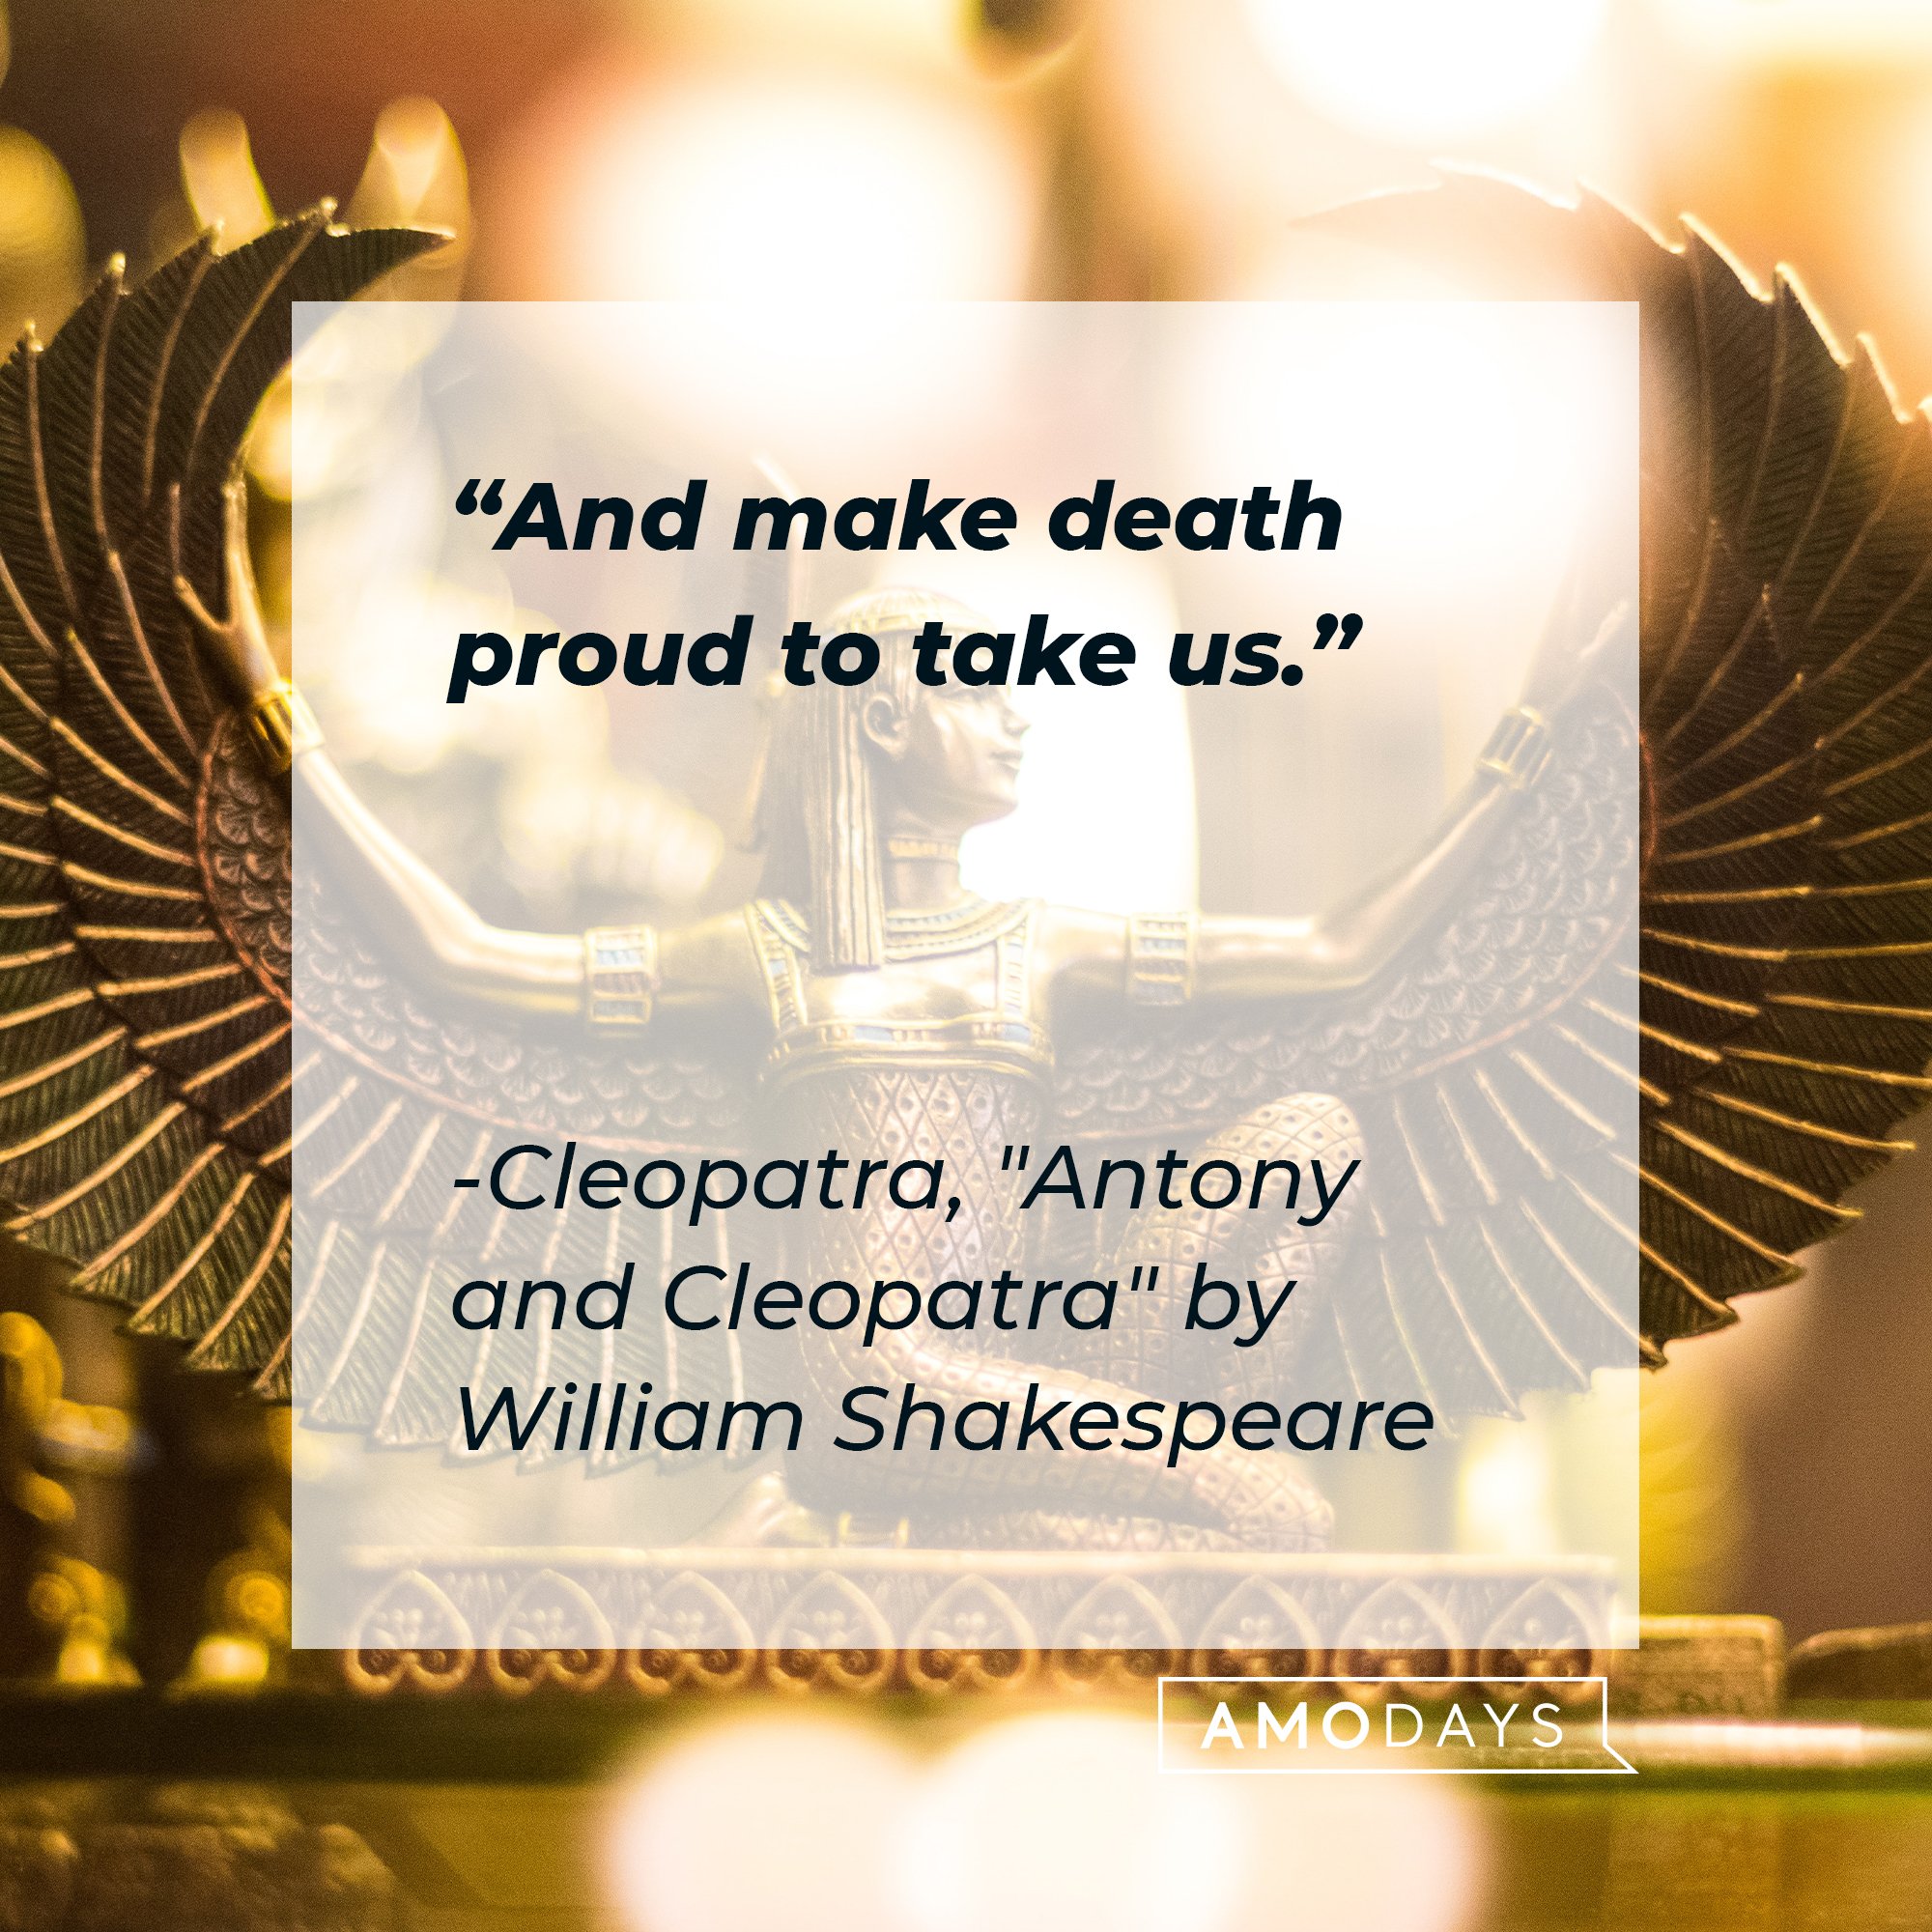  Cleopatra’s quote from "Antony and Cleopatra" by William Shakespeare: "And make death proud to take us." | Image: AmoDays